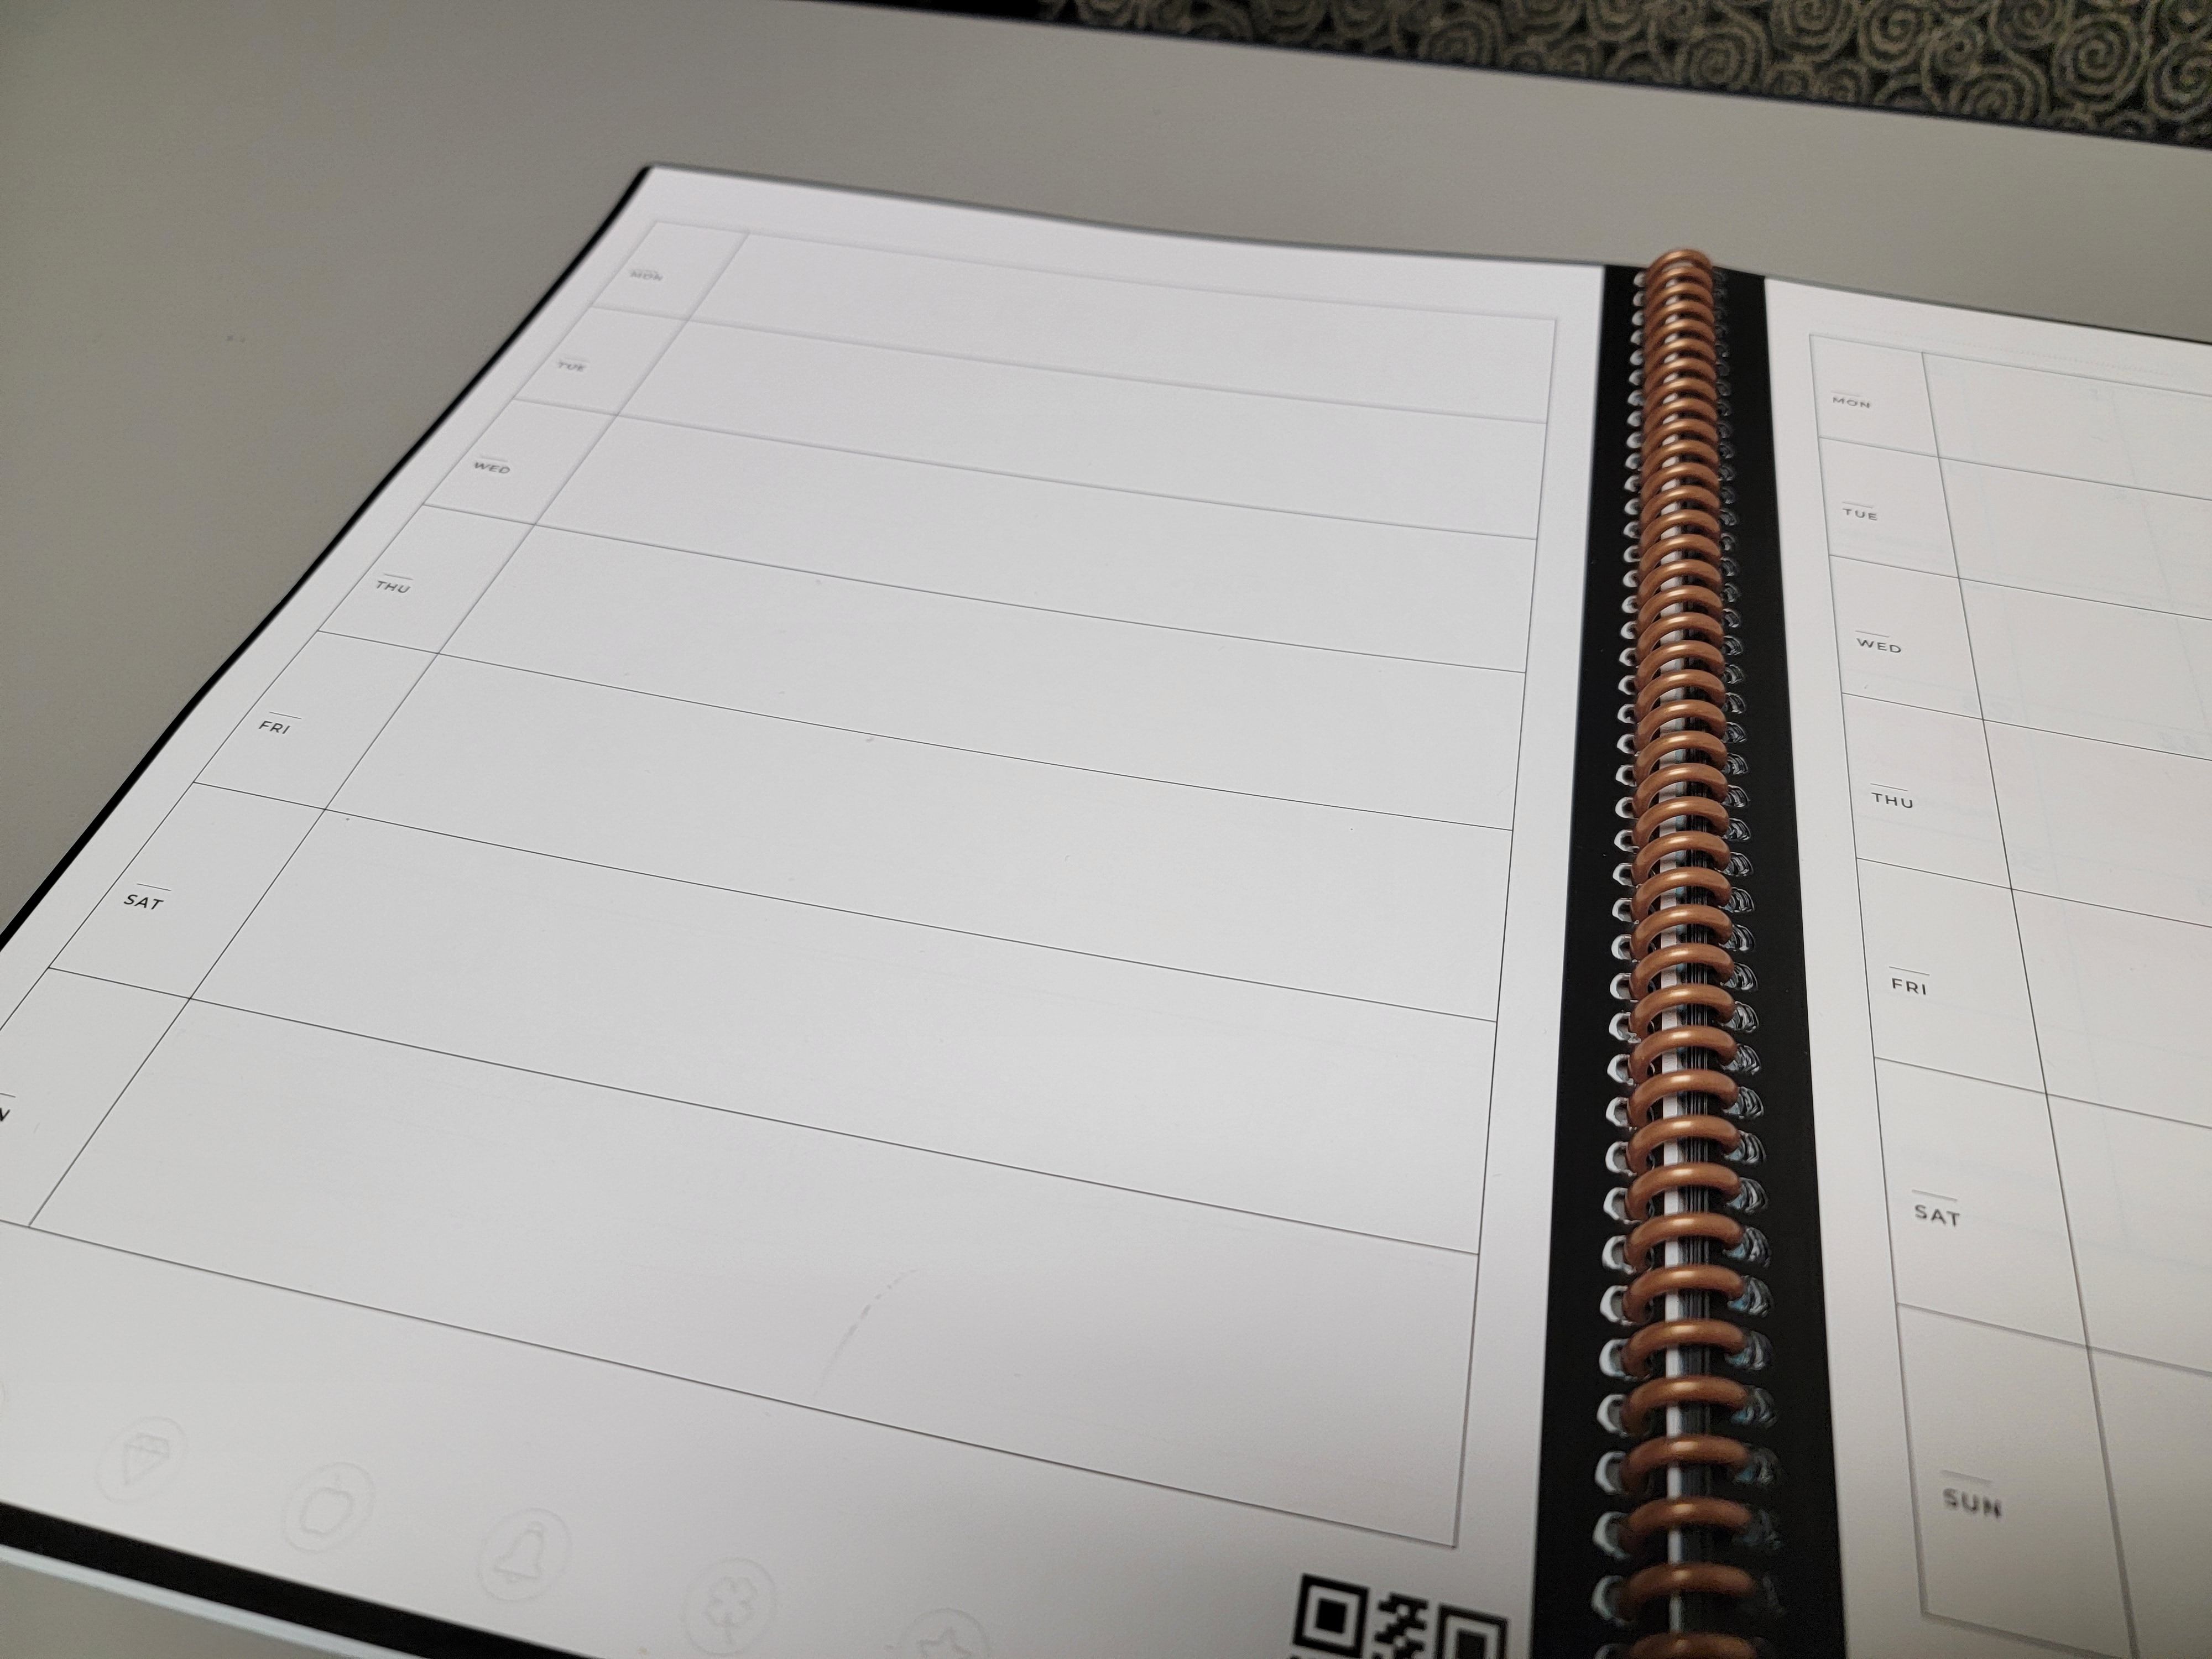 Rocketbook Fusion Review: A Smart Notebook You Can Reuse